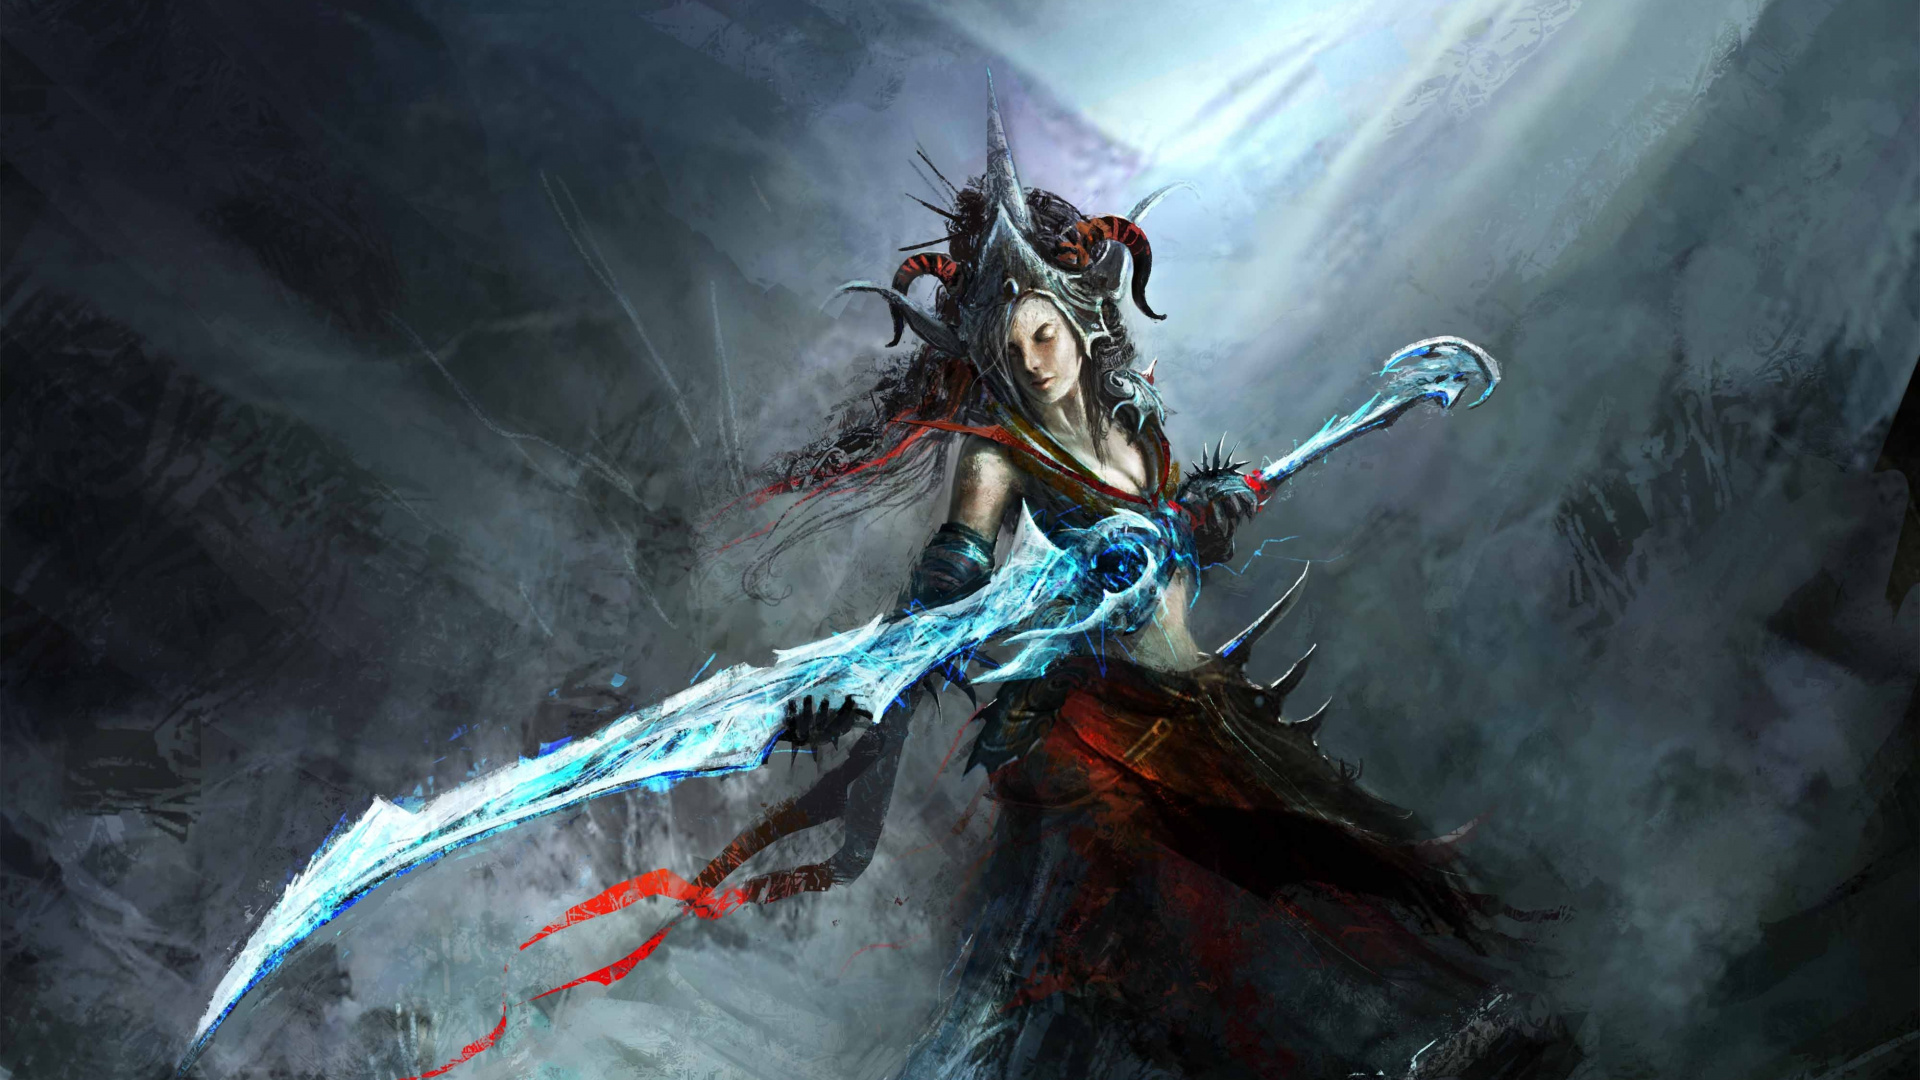 Woman in Blue Dress Holding a Sword Illustration. Wallpaper in 1920x1080 Resolution